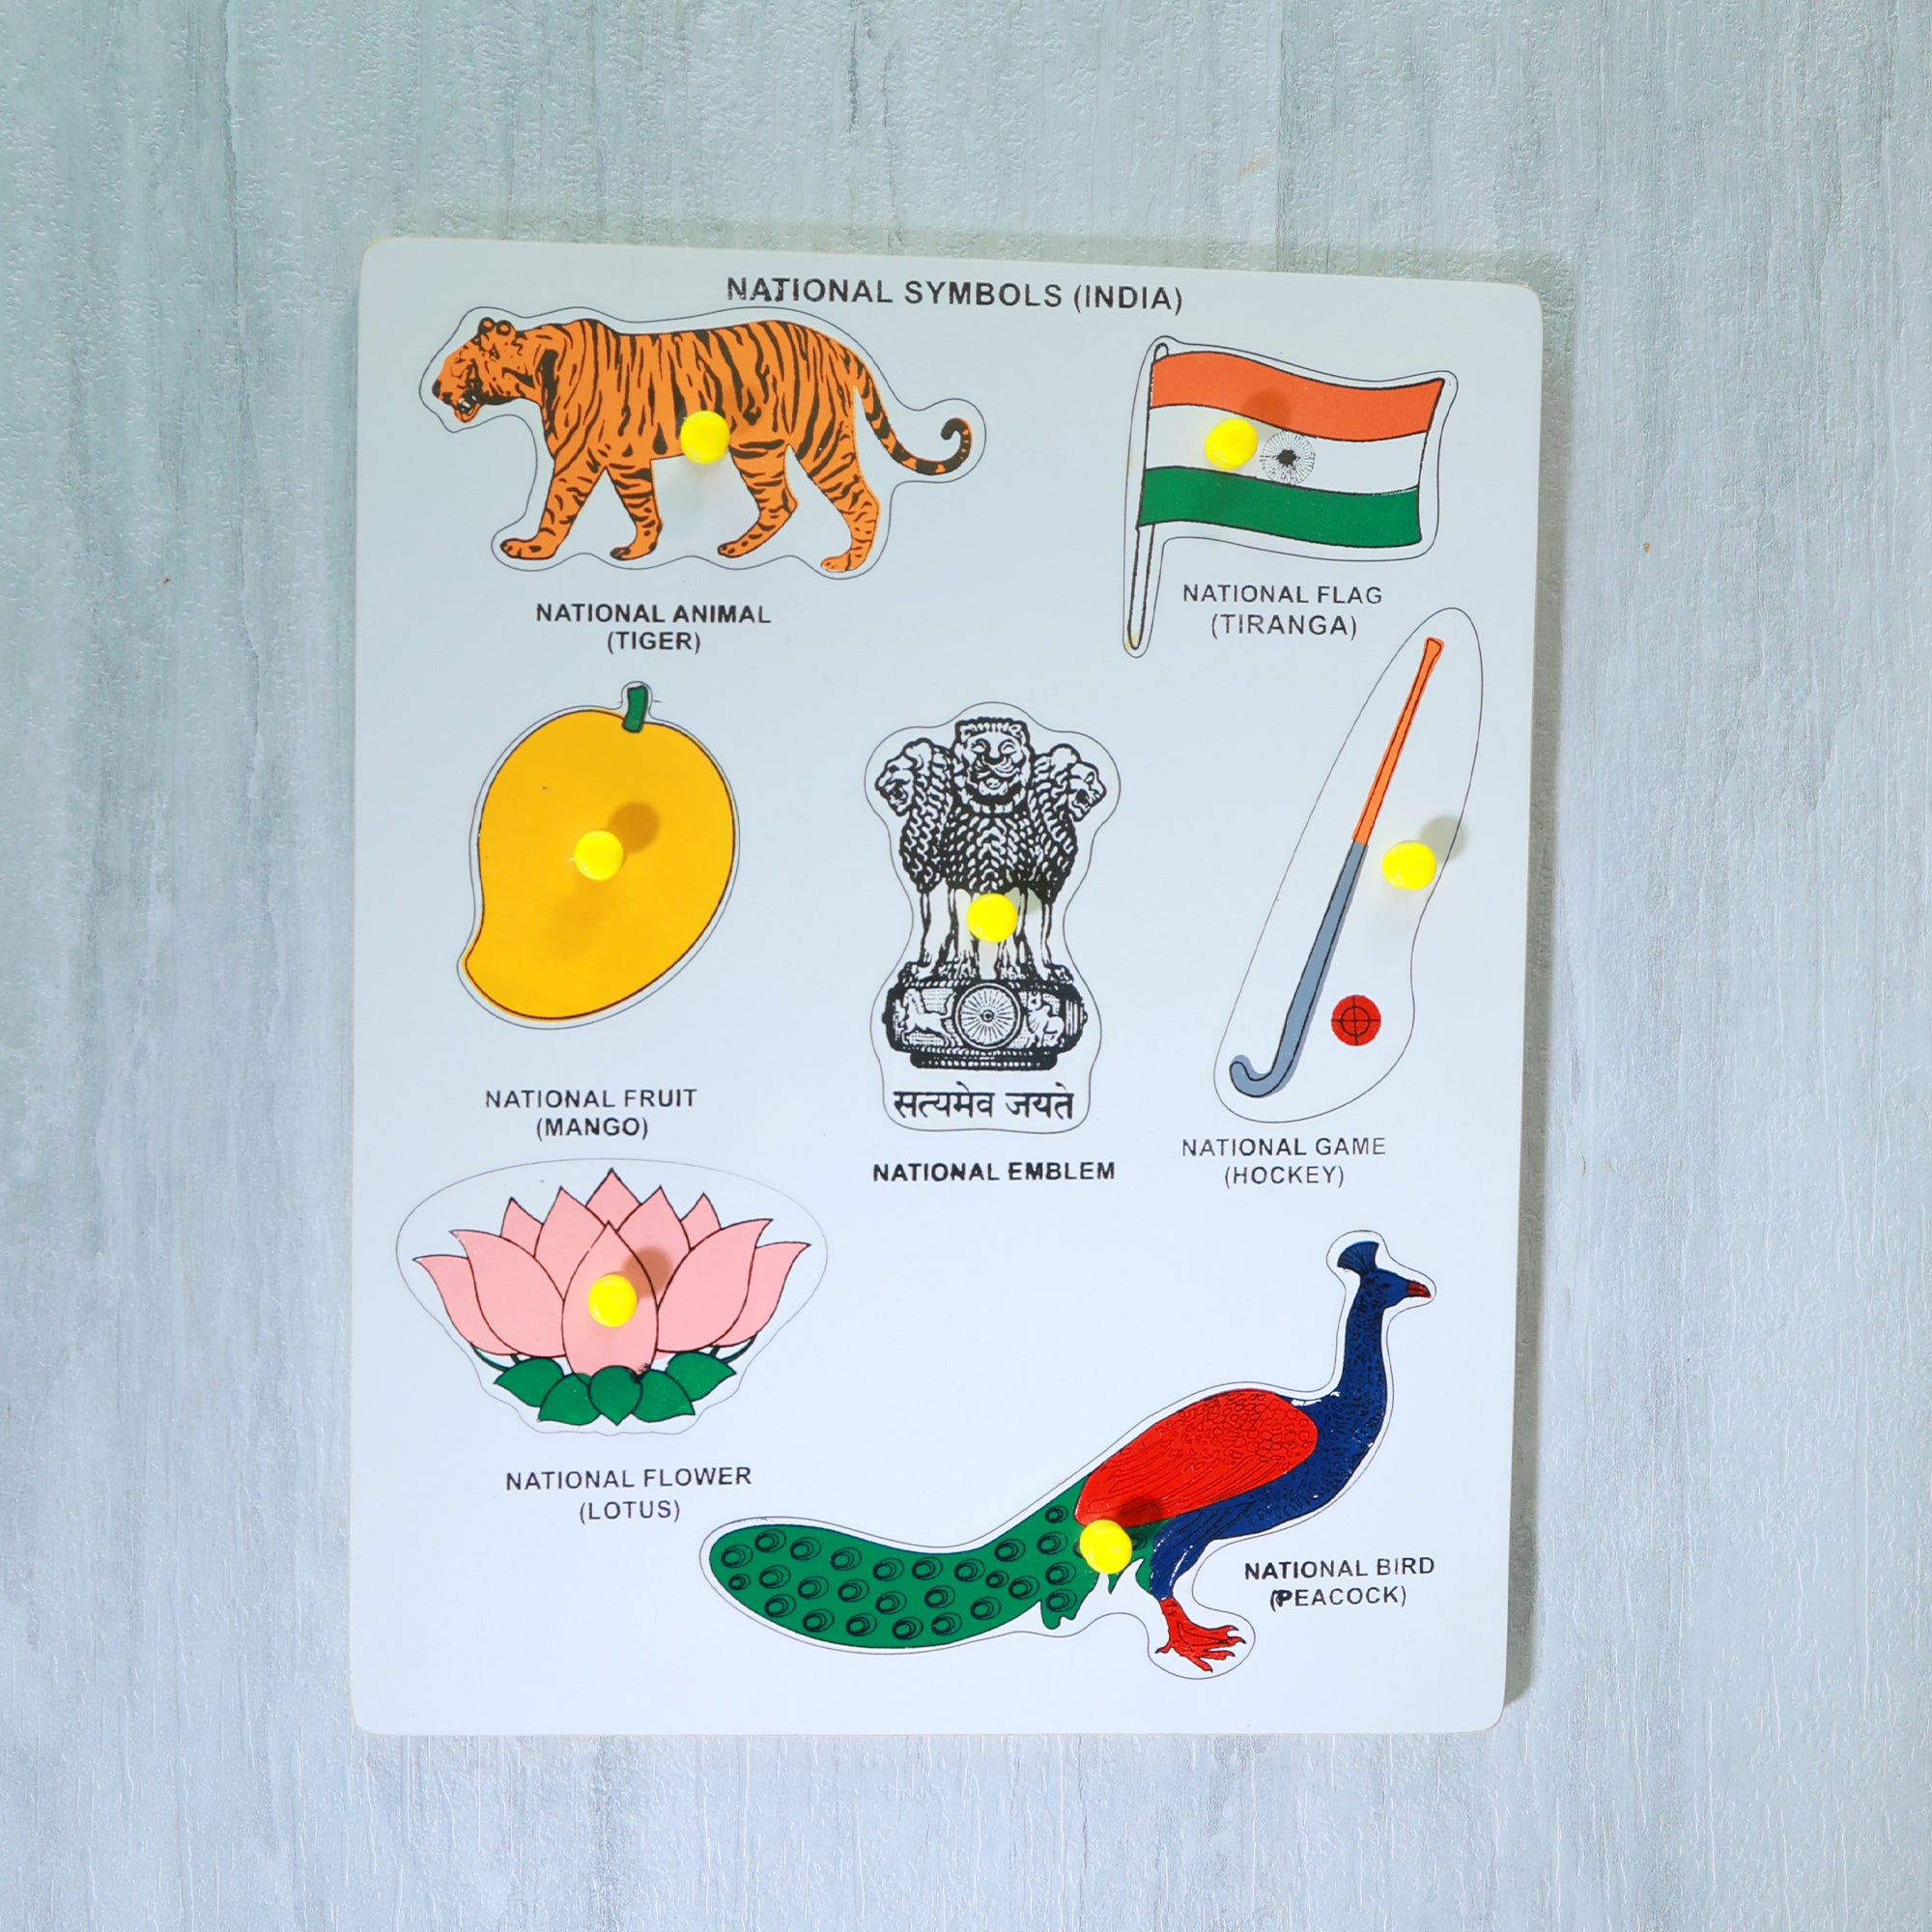 How to draw a tiger - National Animal of India